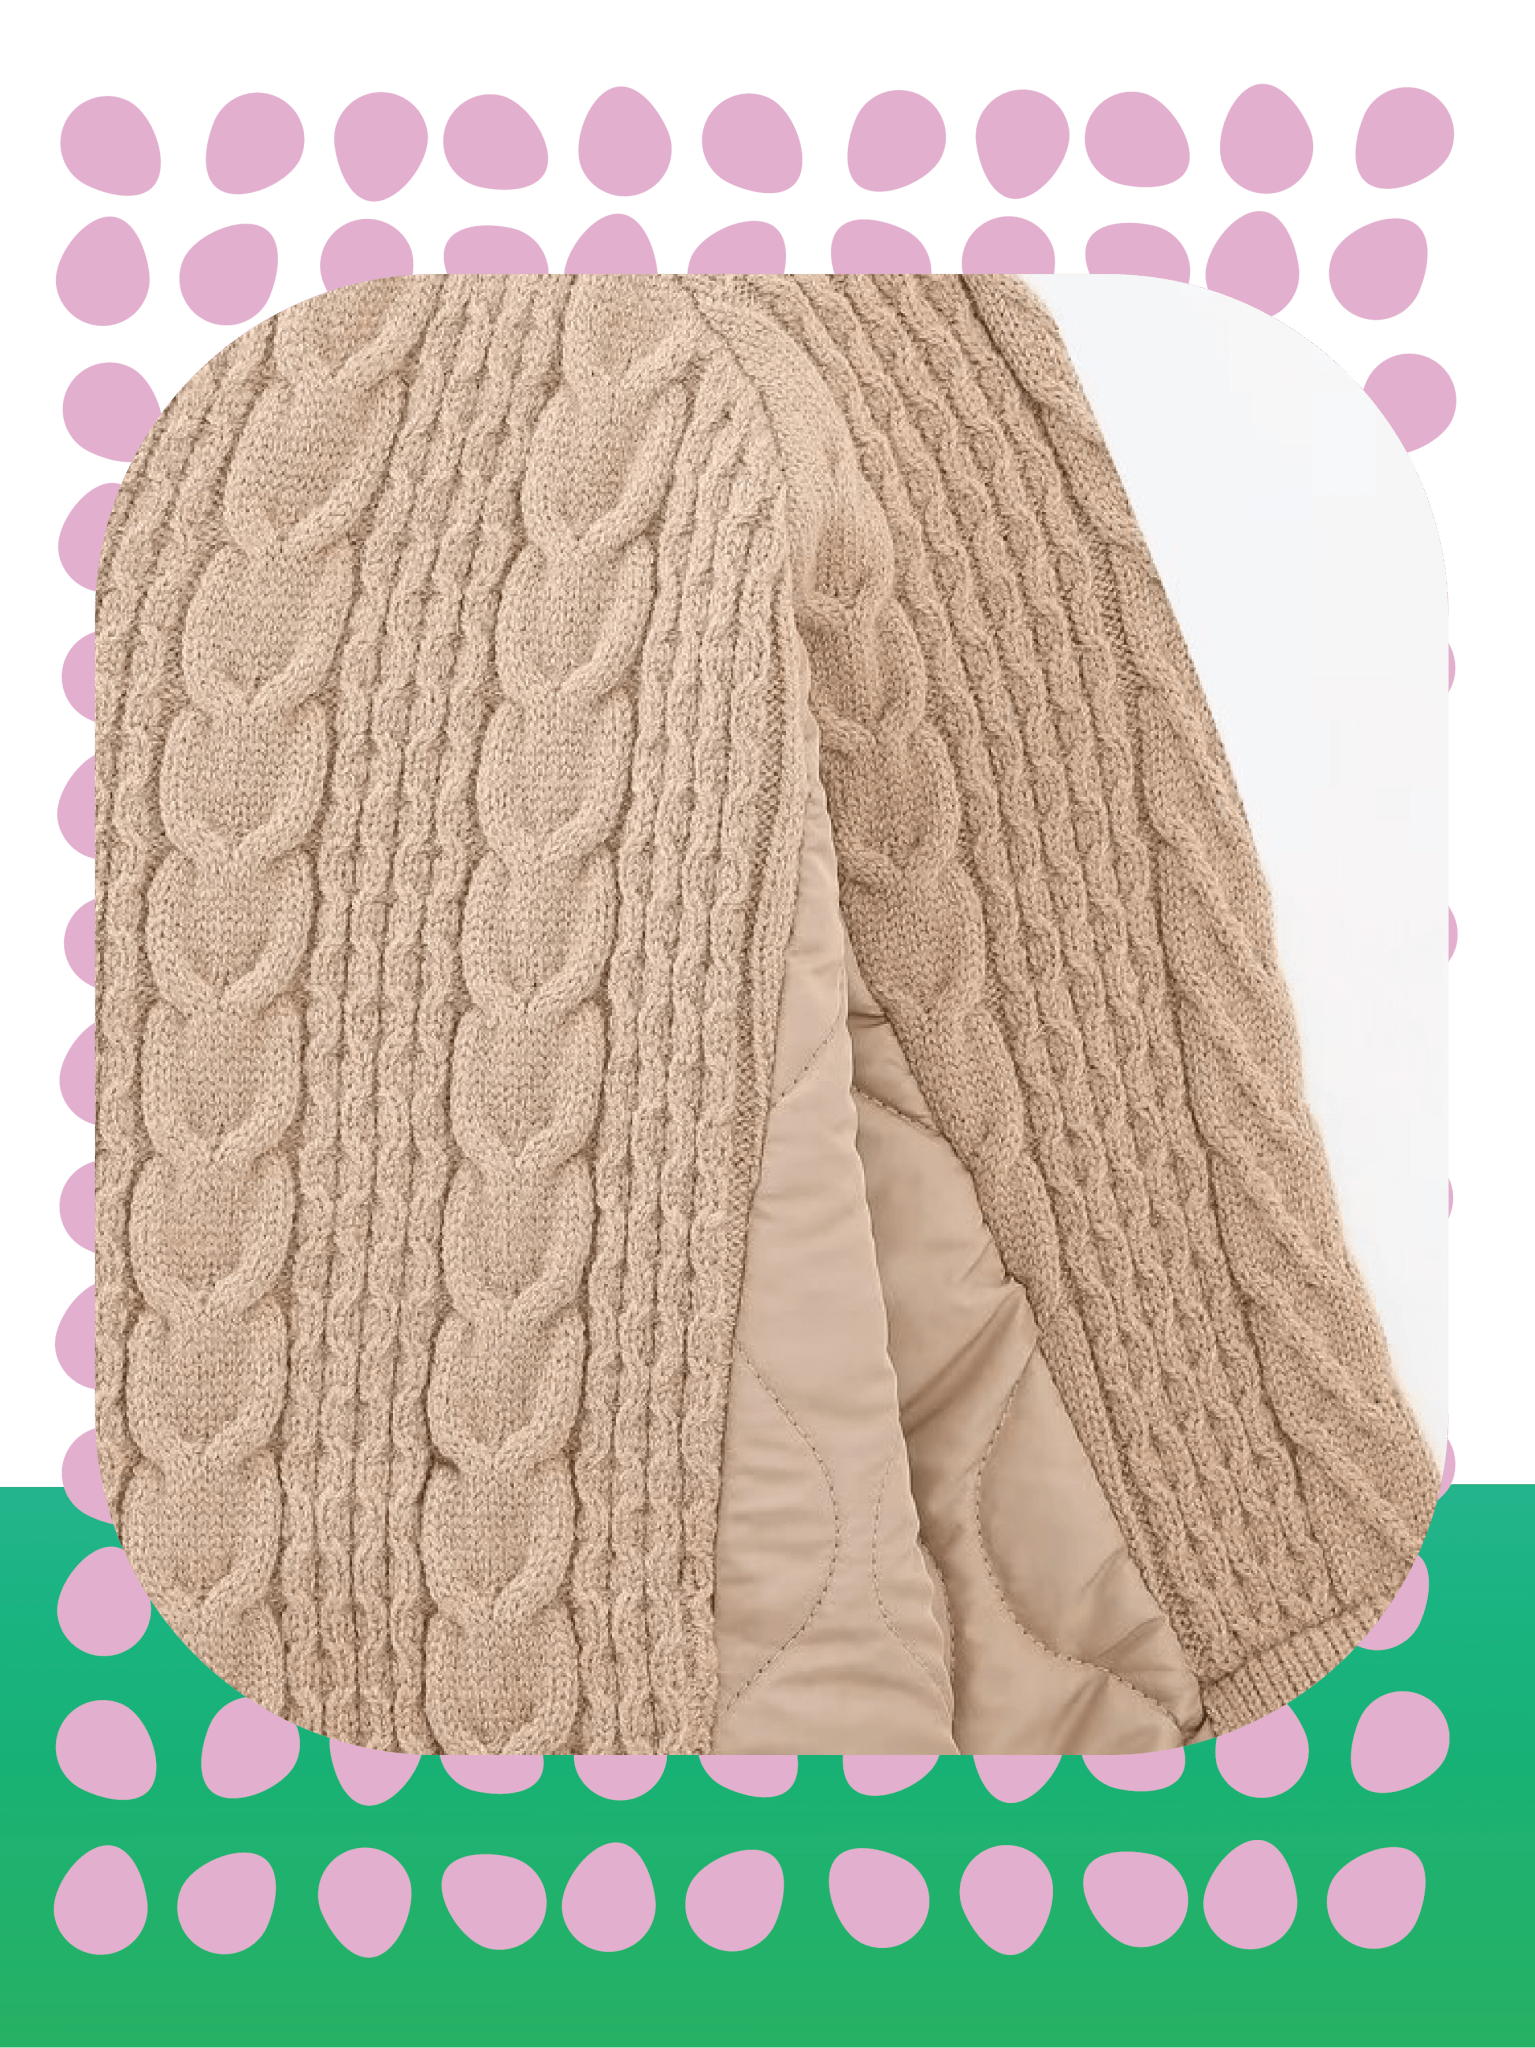 Puffer Patch Knit Tops - LOVE POMME POMME